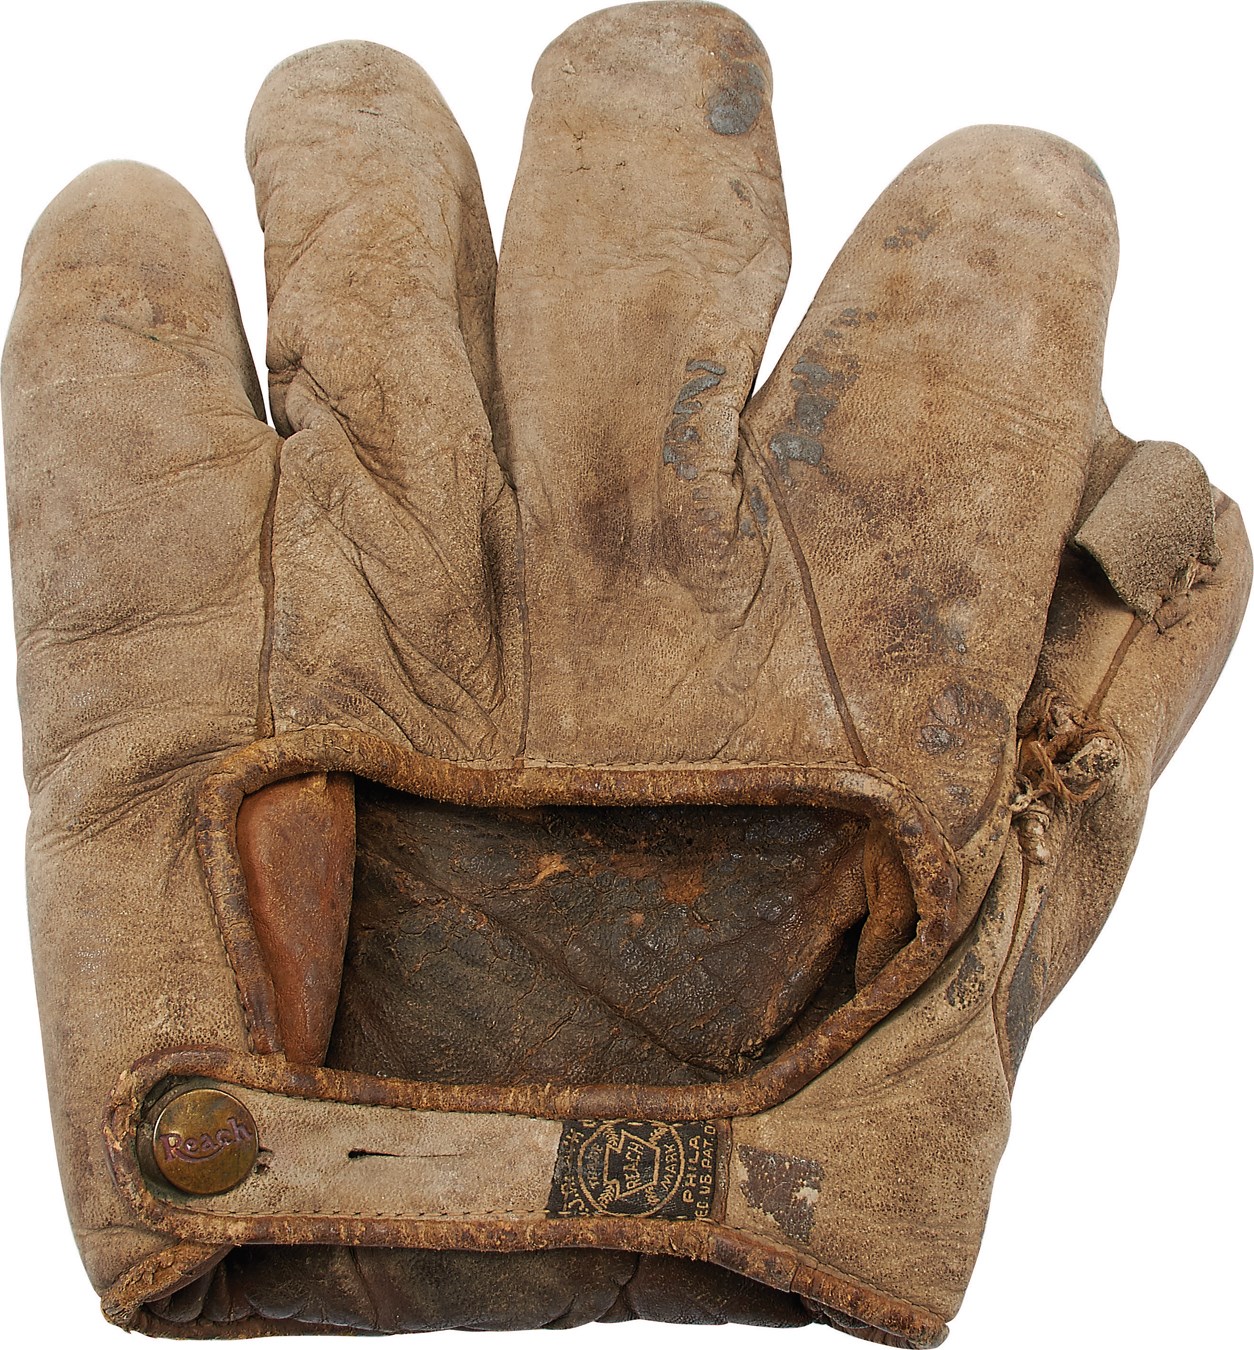 St. Louis Cardinals - 1926-29 Grover Cleveland Alexander Game Used Glove